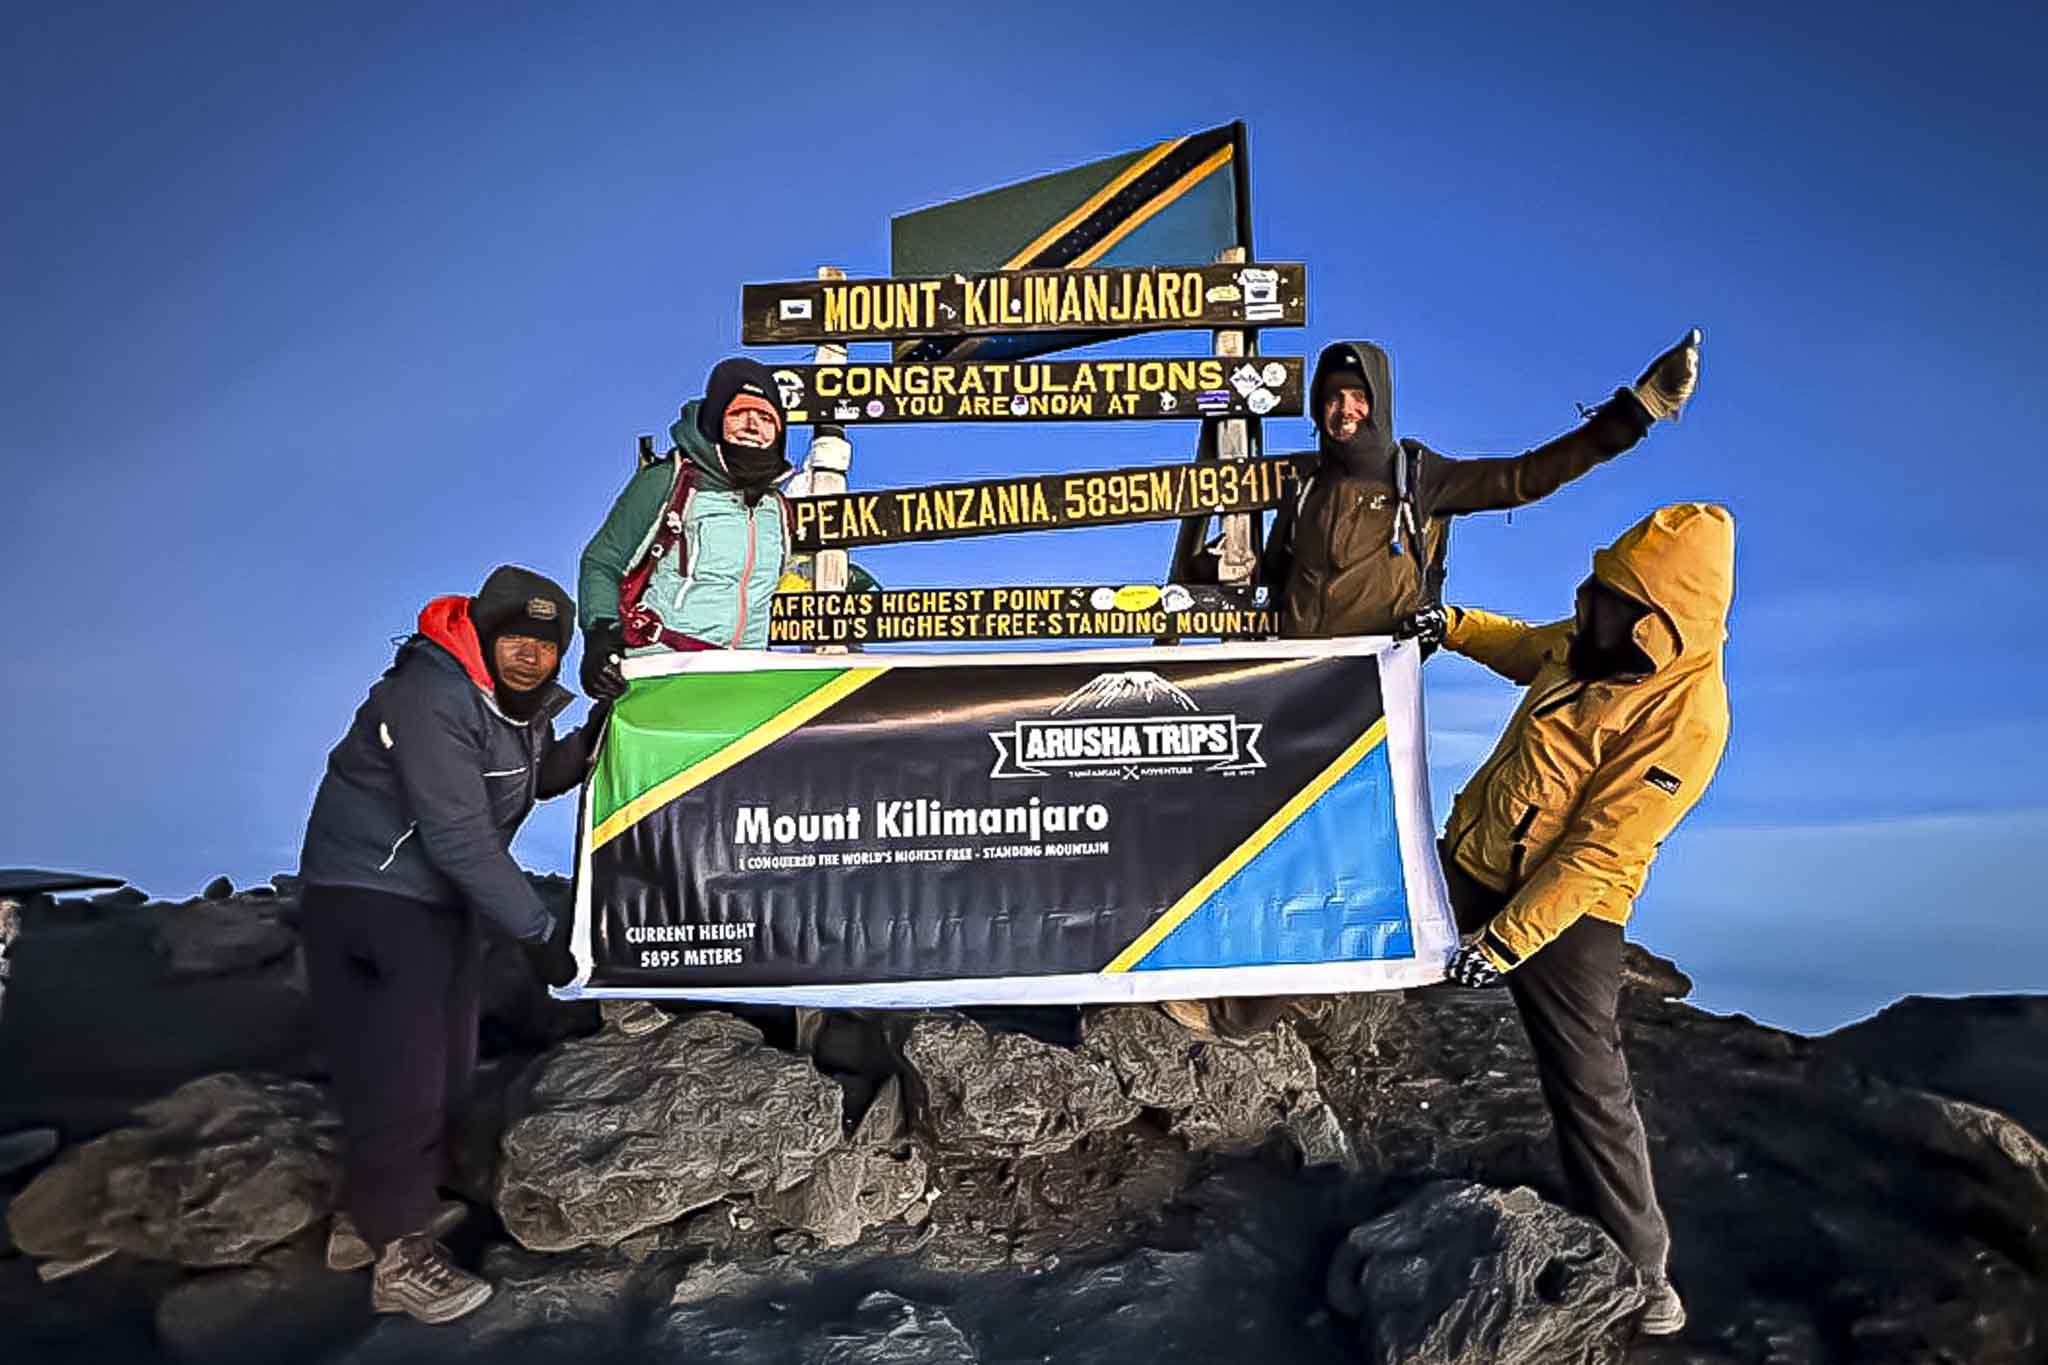 Recommended Hiking Gears for Climbing Kilimanjaro